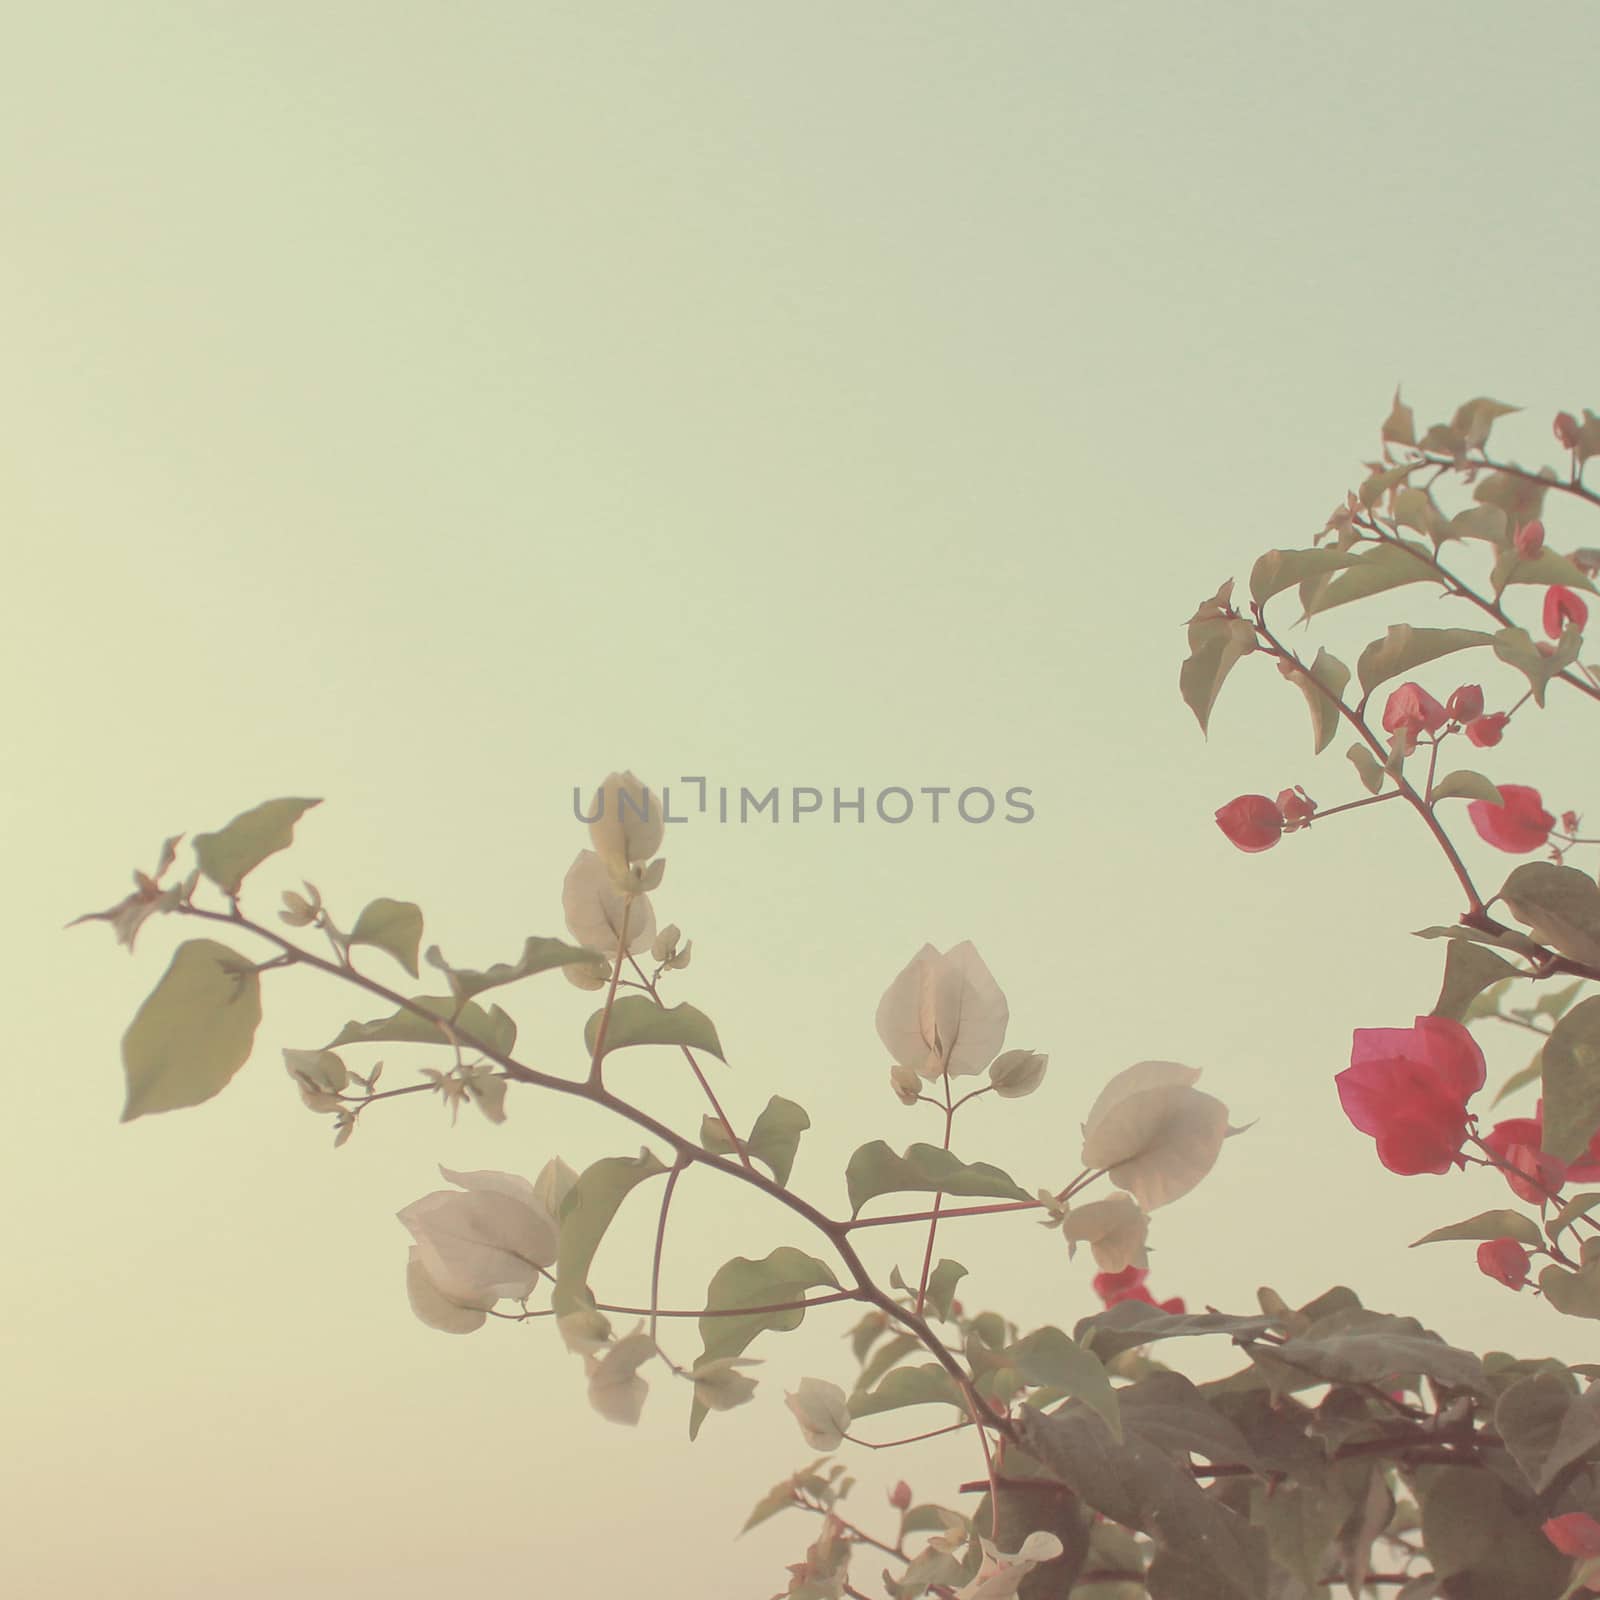 Bush of Bougainvillea flowers with retro filter effect by nuchylee